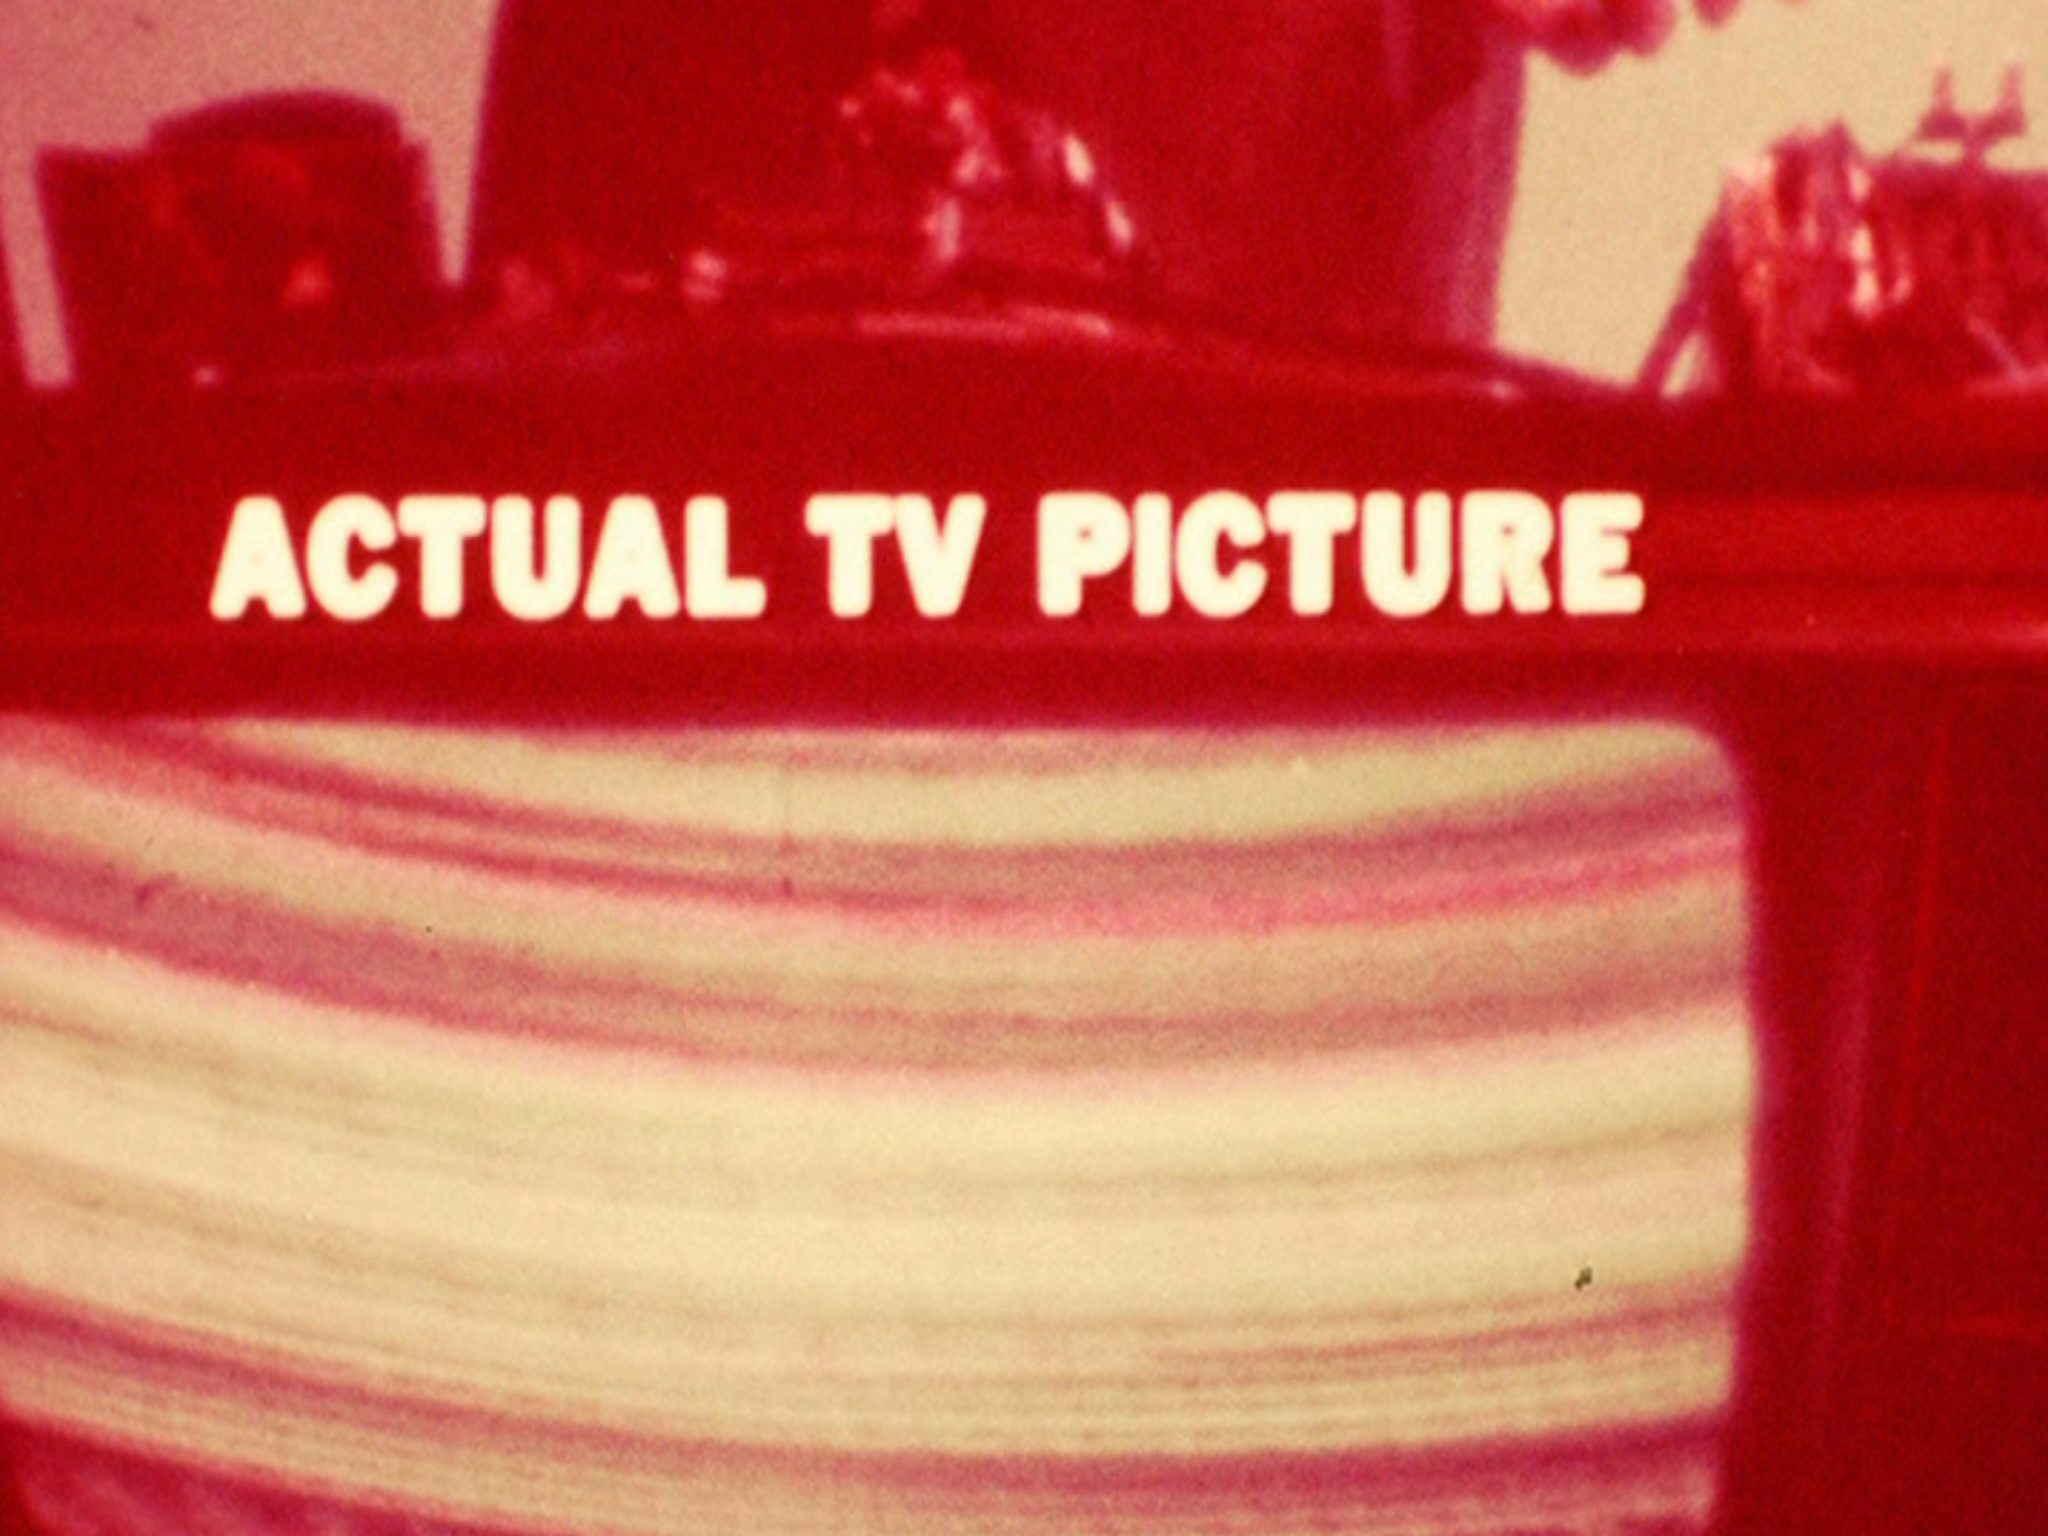 Actual T.V. Picture, 2013, film still. Courtesy the Artist and The Modern Institute/Toby Webster Ltd, Glasgow Photography: Ruth Clark